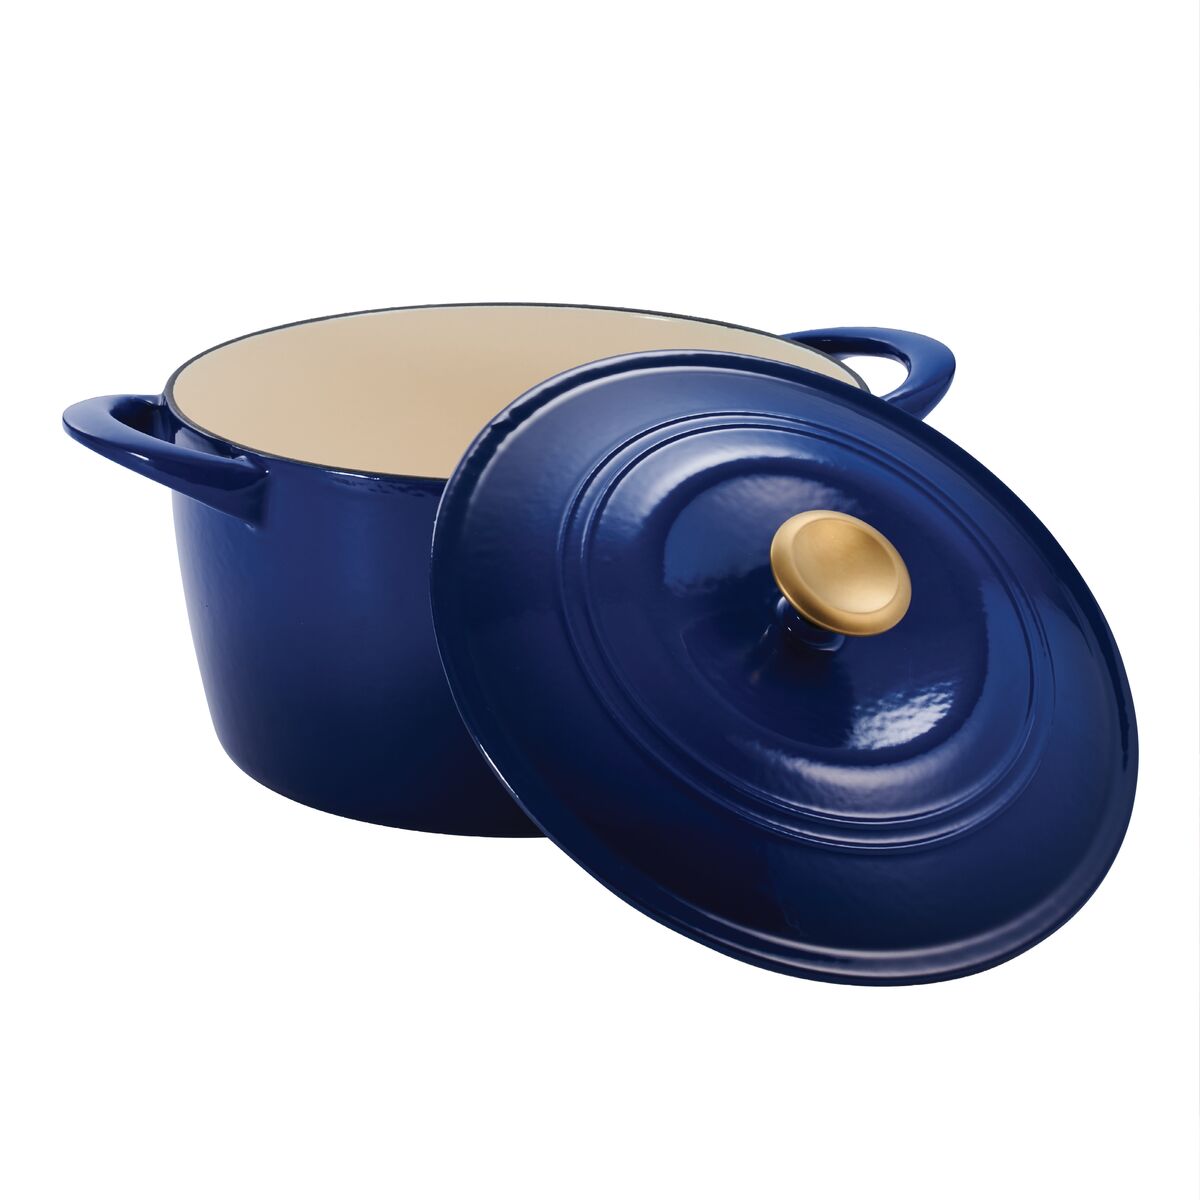 7 Qt Enameled Cast Iron Covered Tall Round Dutch Oven - Classic